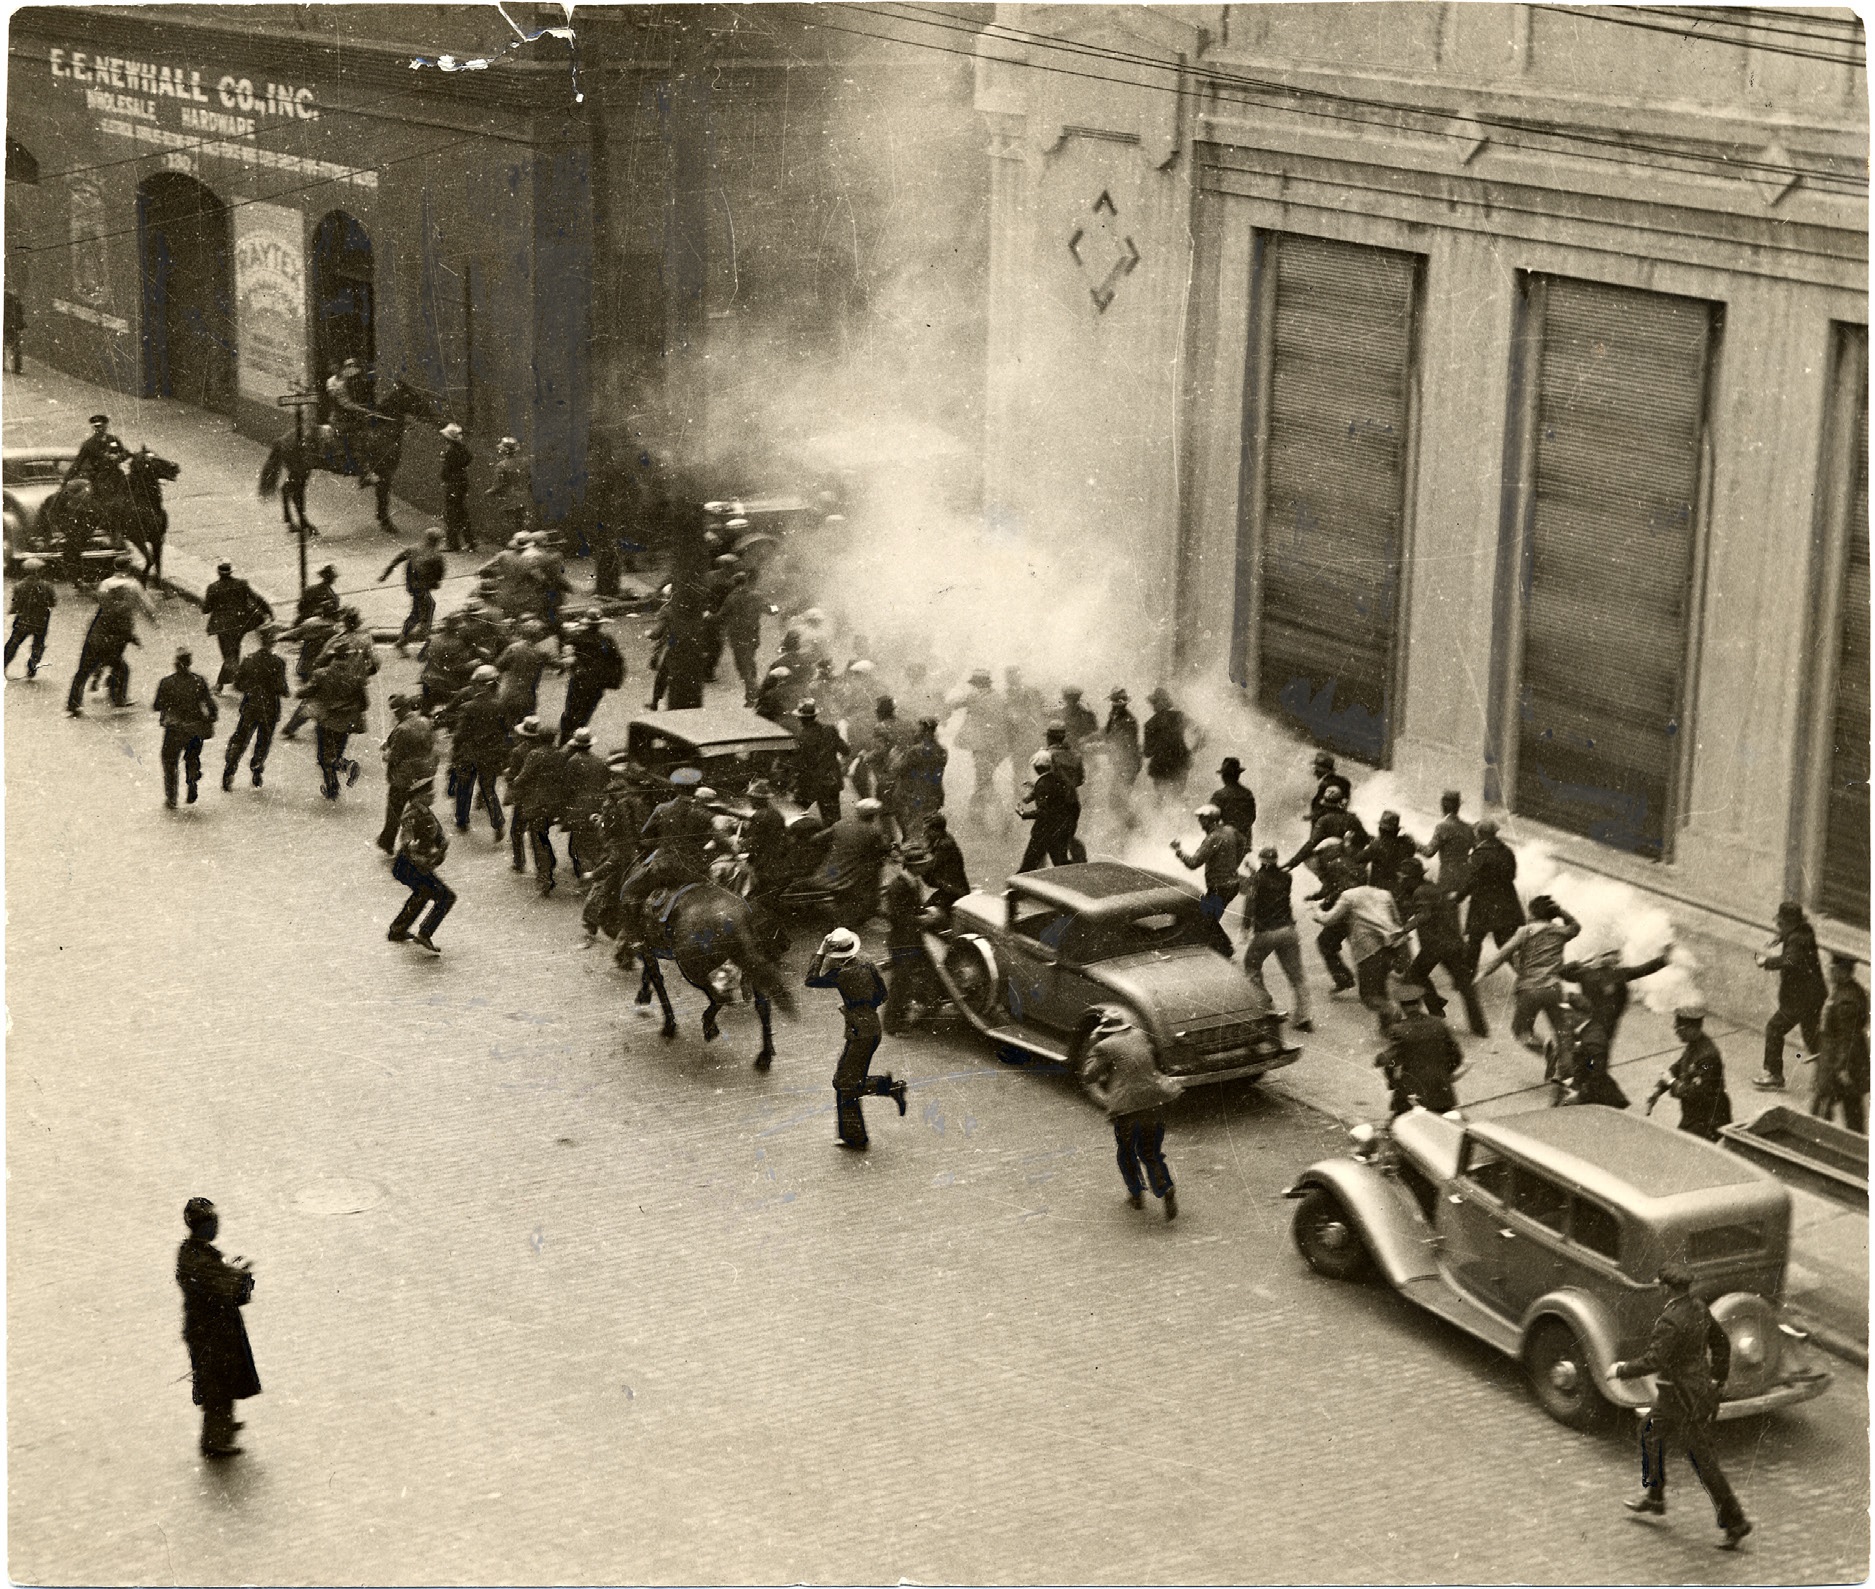 Police use tear gas against participants in San Francisco’s 1934 general strike.